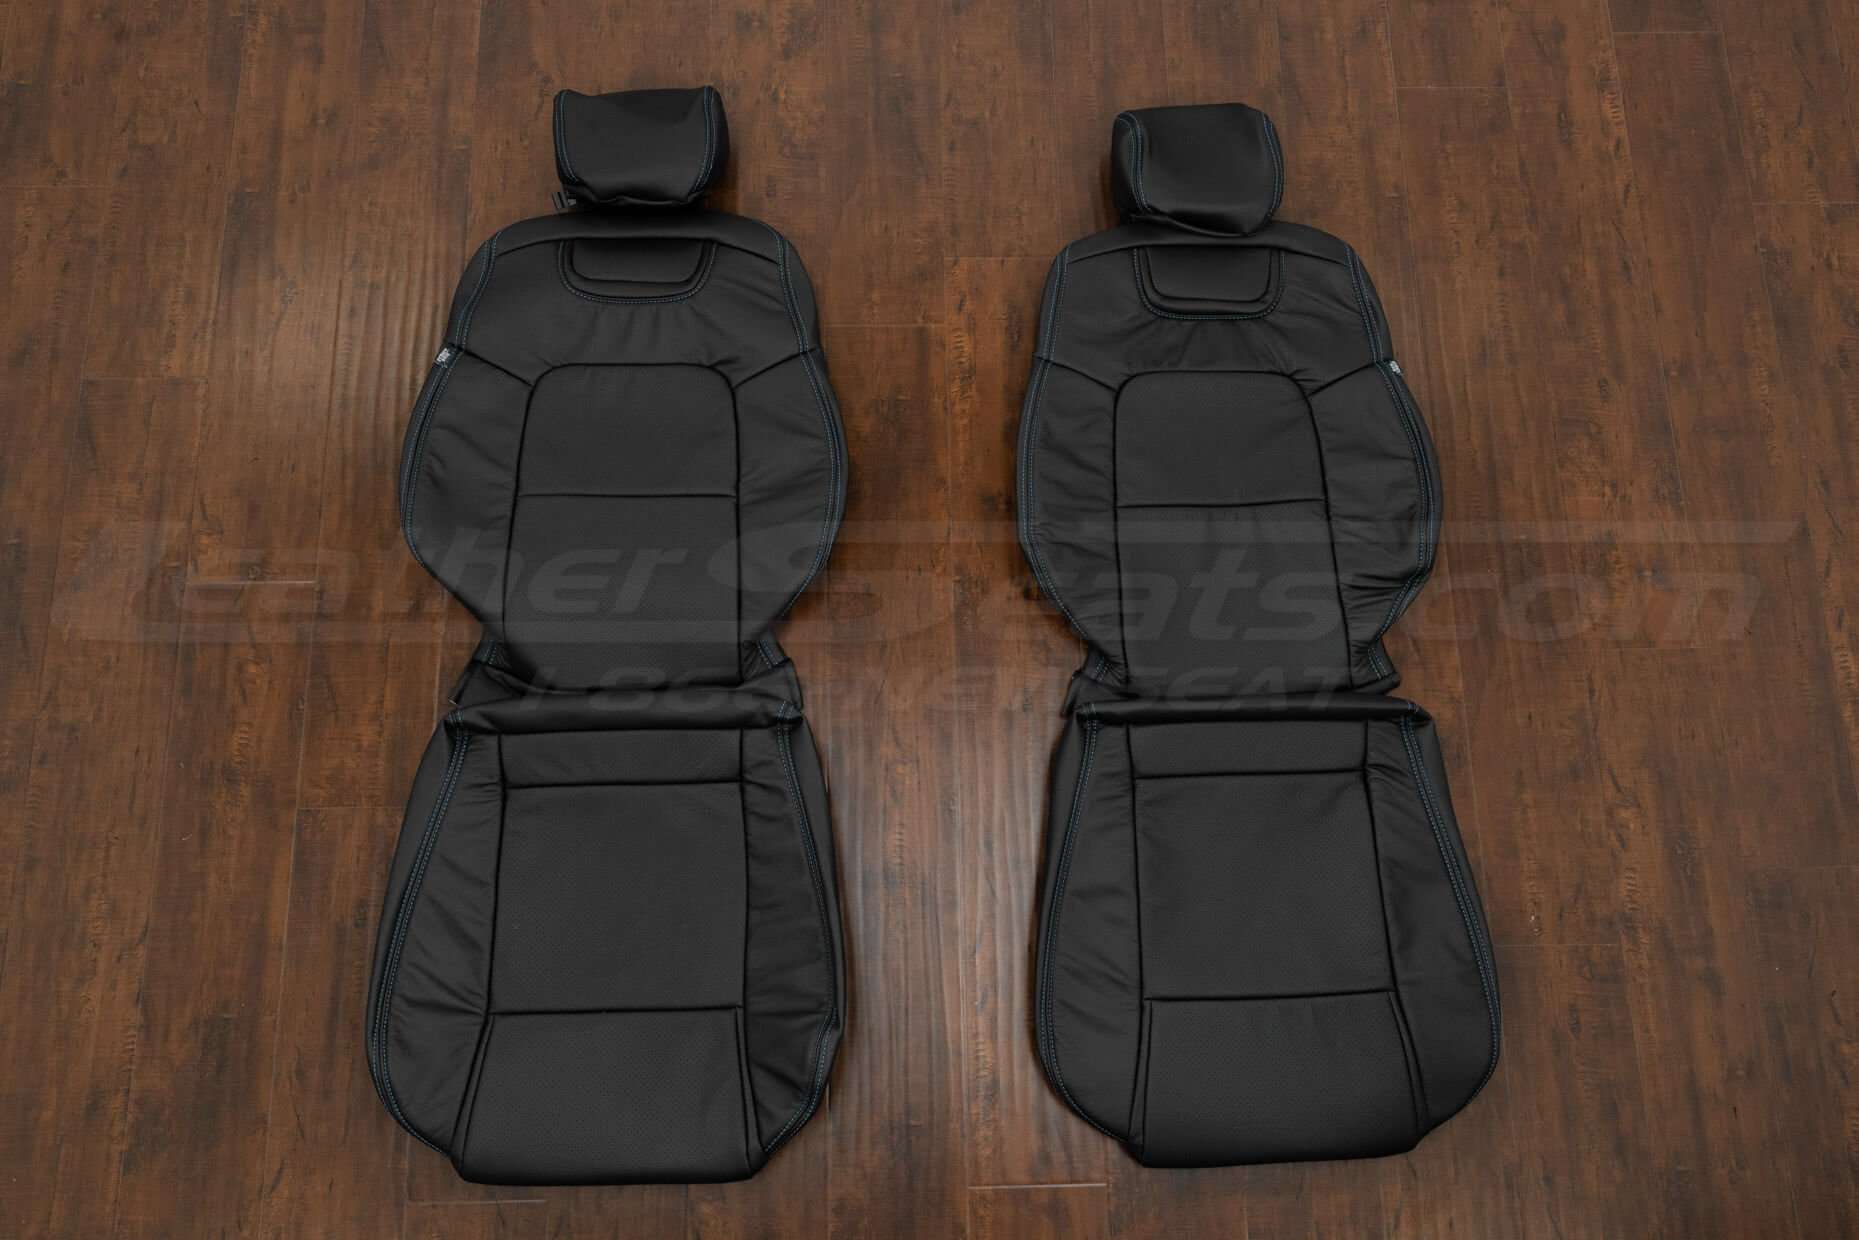 2008-2009 Pontiac G8 Leather Seat Interior Kit - Black - Front seat upholstery